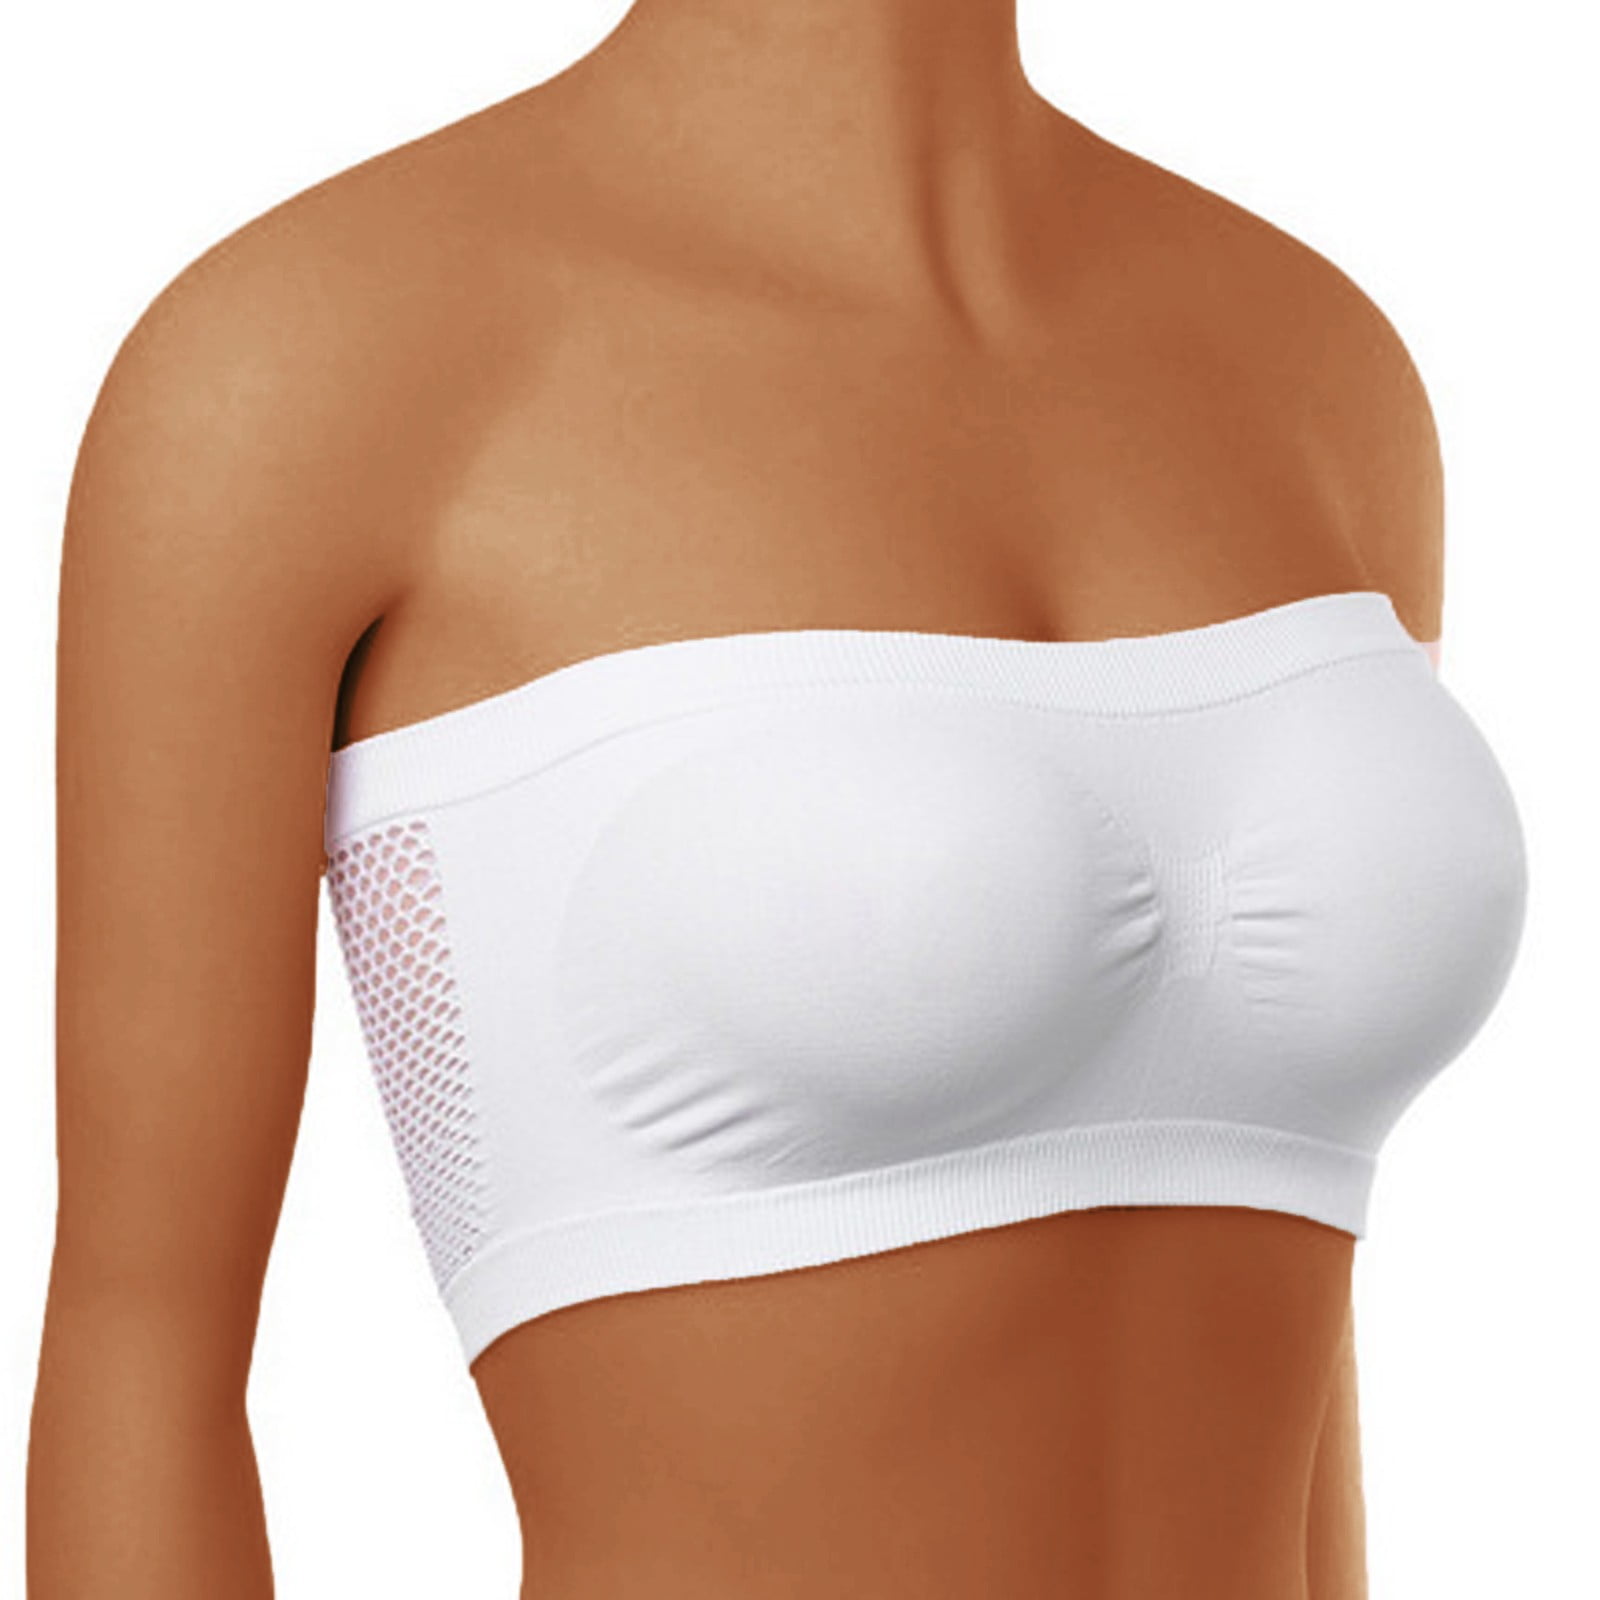 Mlqidk Womens Strapless Bralette Seamless Bandeau Stretchy Non-Padded Bandeau Tube Top Bra,White L